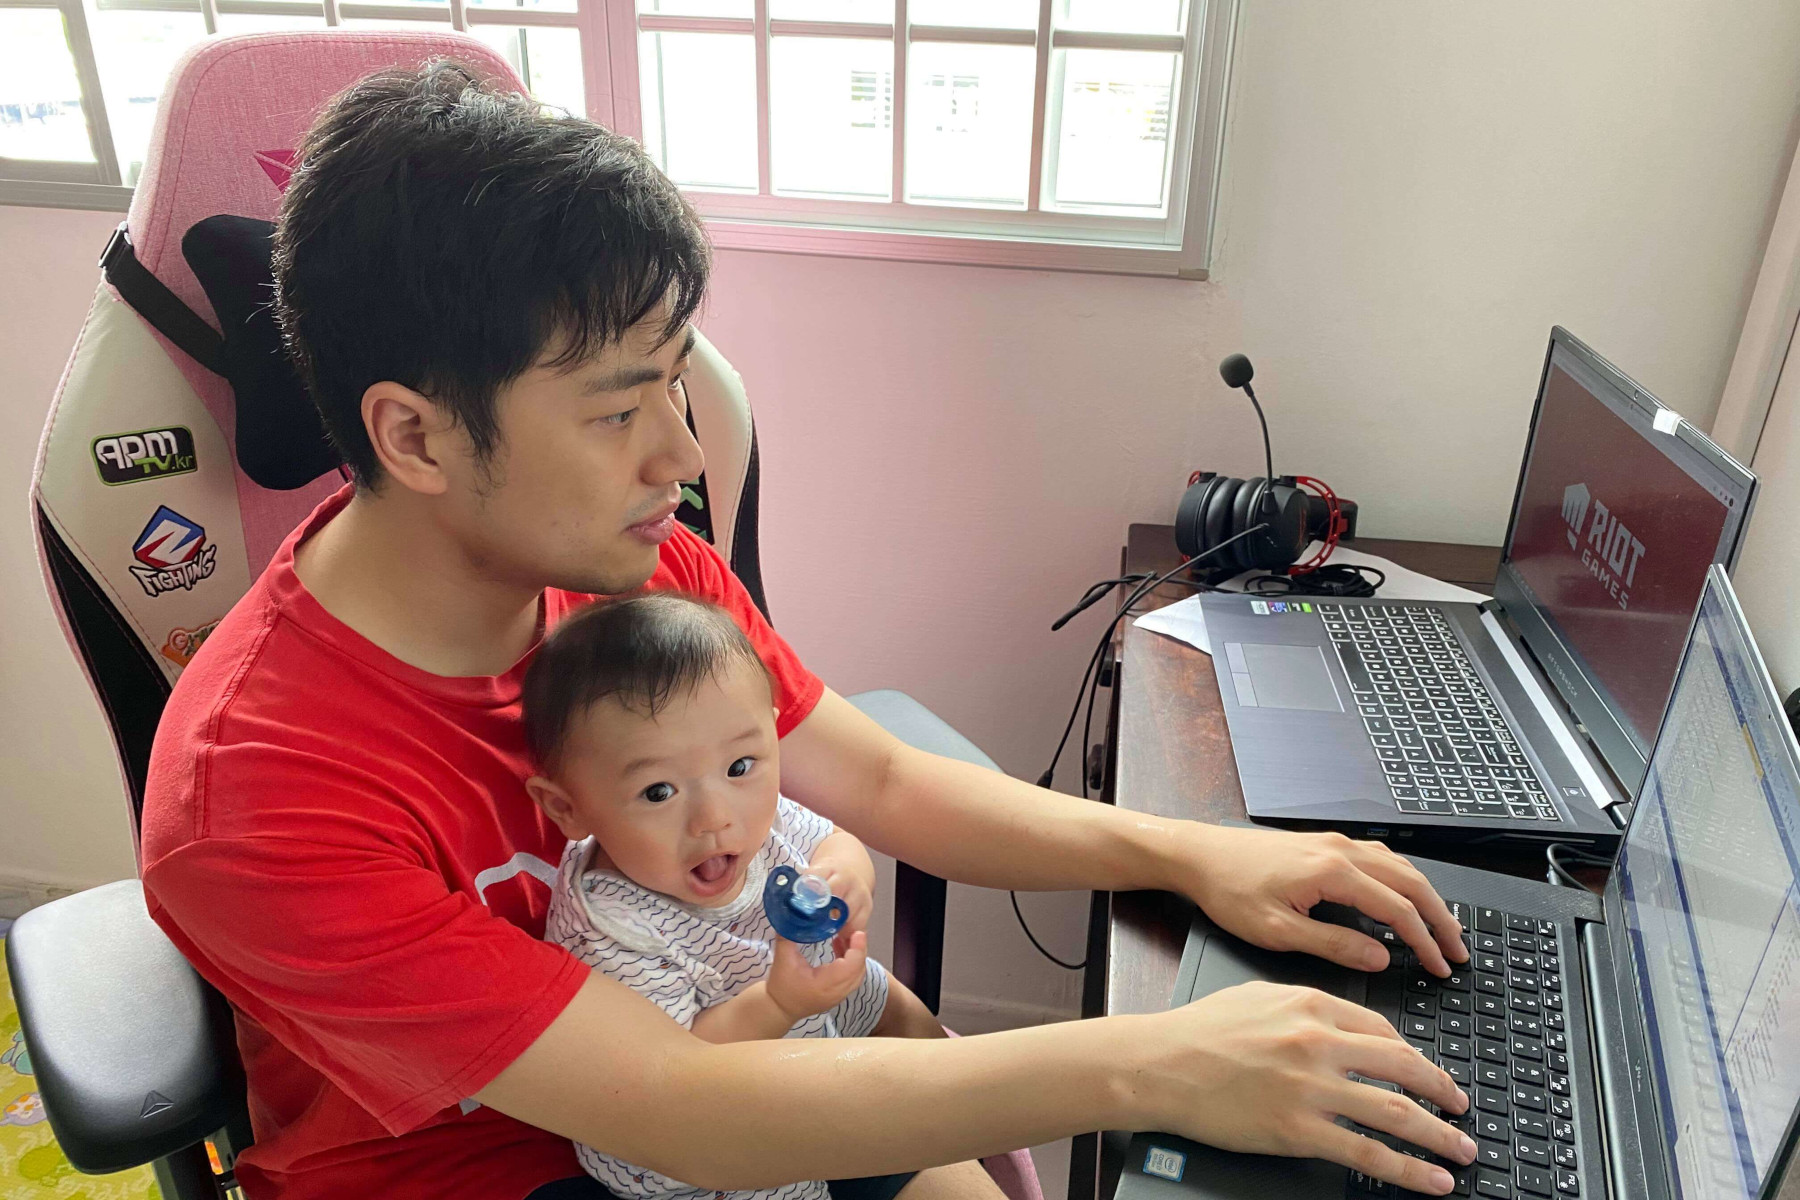 Kenny Chong working from home with his baby.